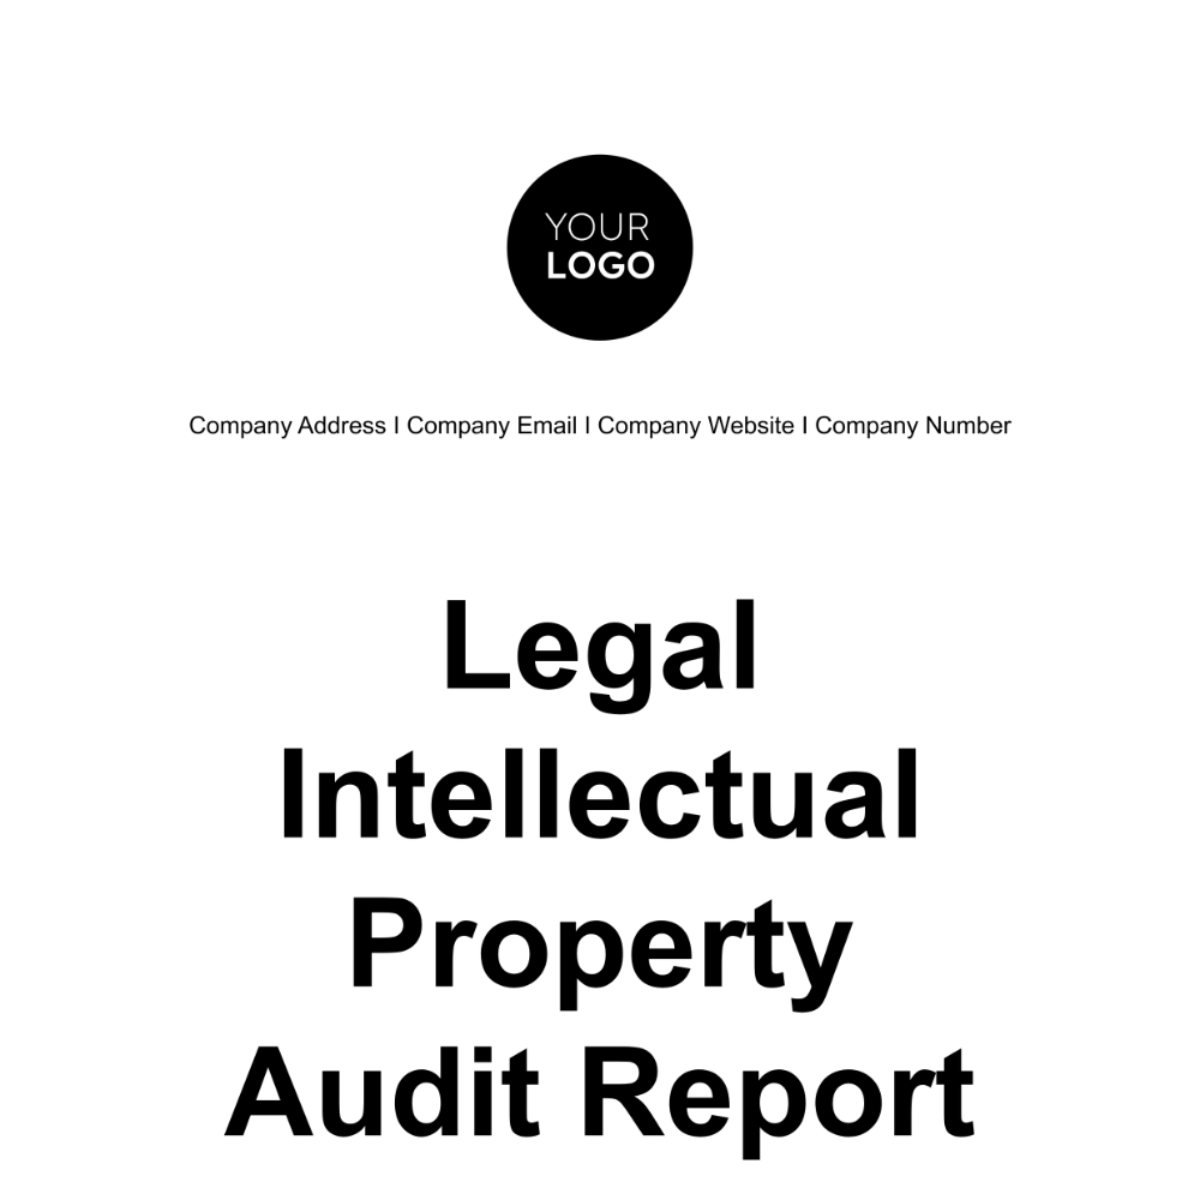 Legal Intellectual Property Audit Report Template